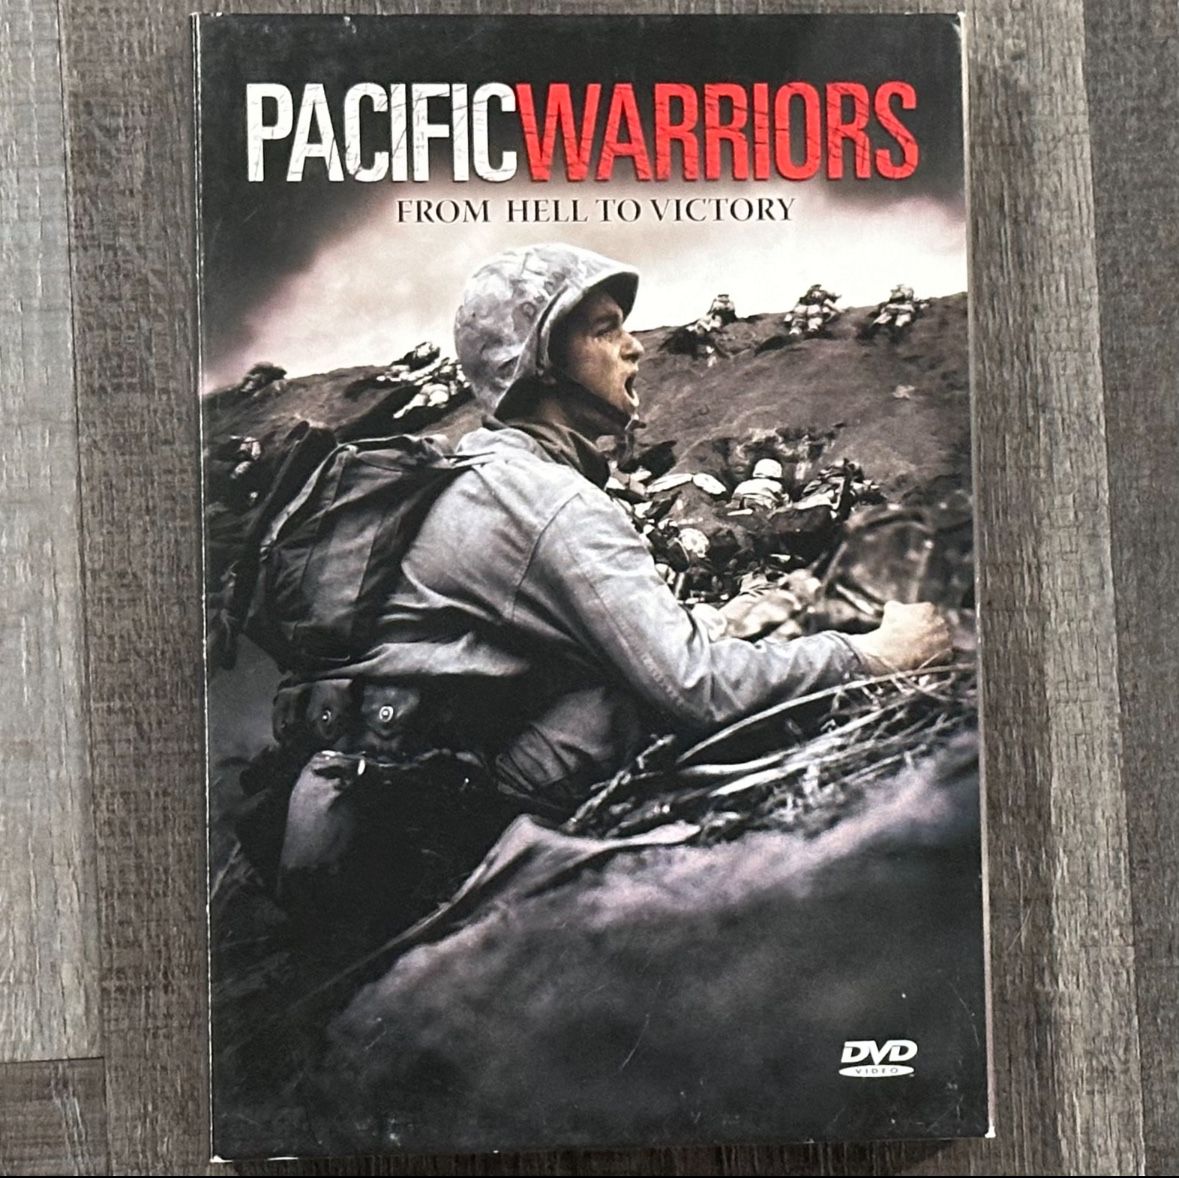 “Pacific Warriors” WWII History 5-DVD Set